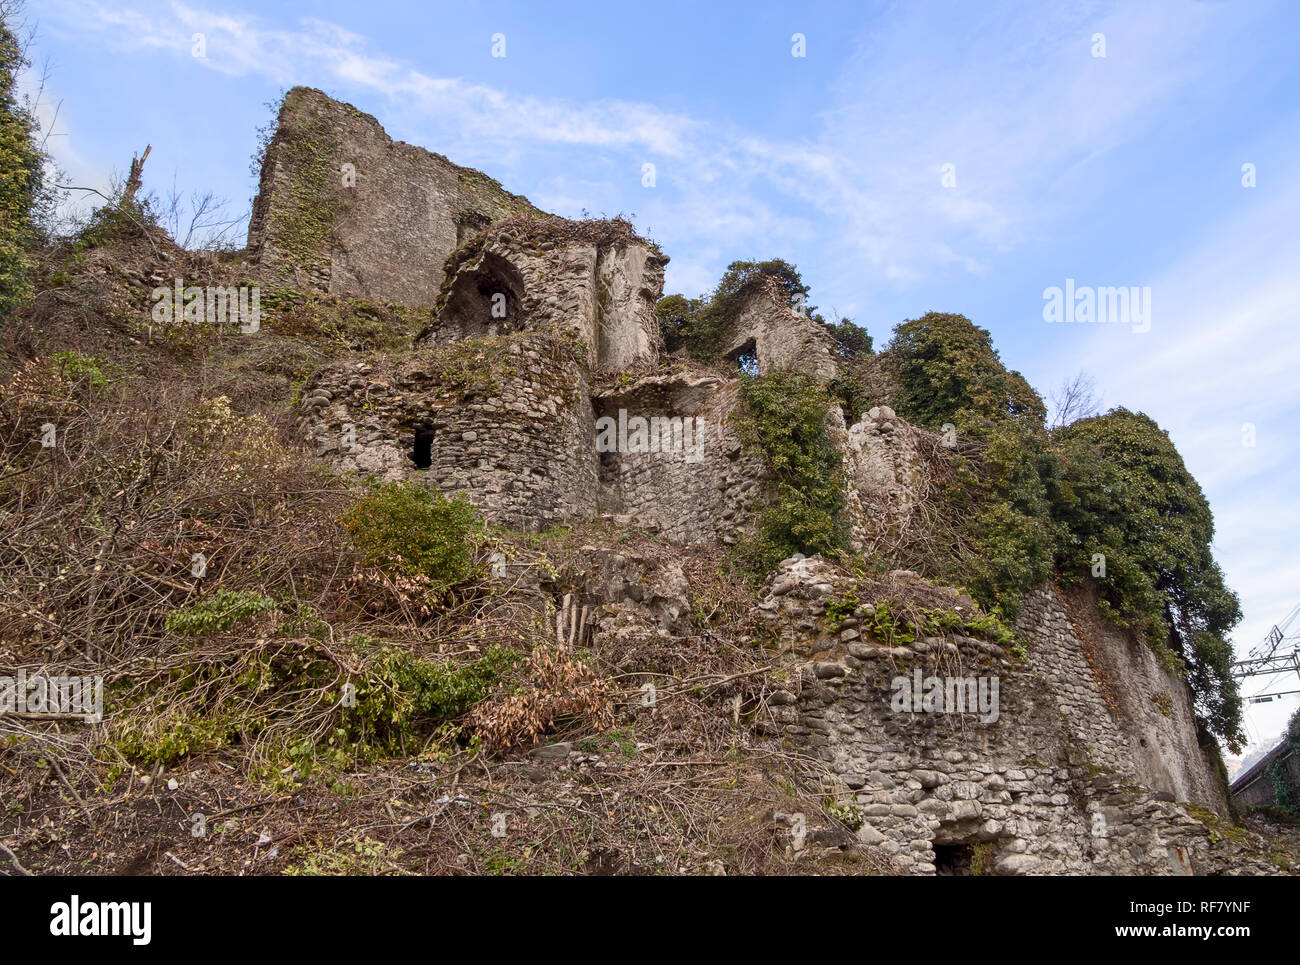 Section of the old Malnido castle ruins in Villafranca in Lunigiana, Italy. Removal of vegetation work in progress January 2019. Stock Photo